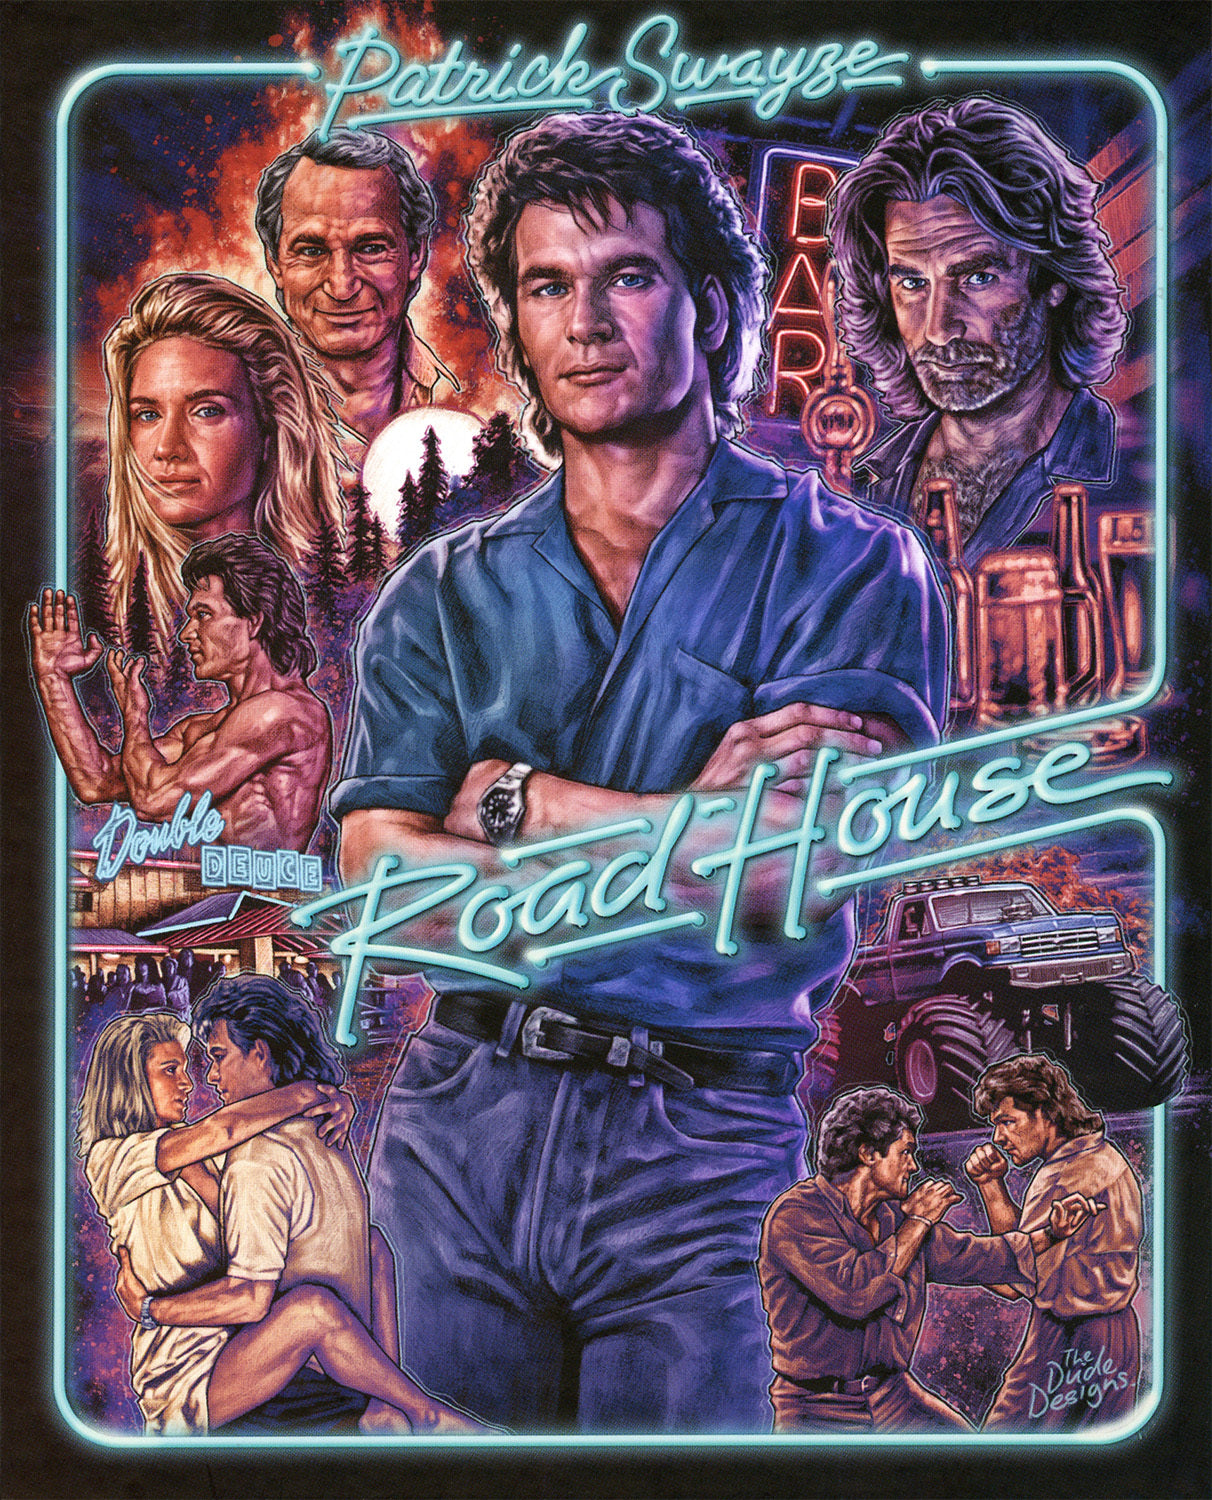 Road House 4K Limited Edition (VSU004)(Exclusive) Blurays For Everyone